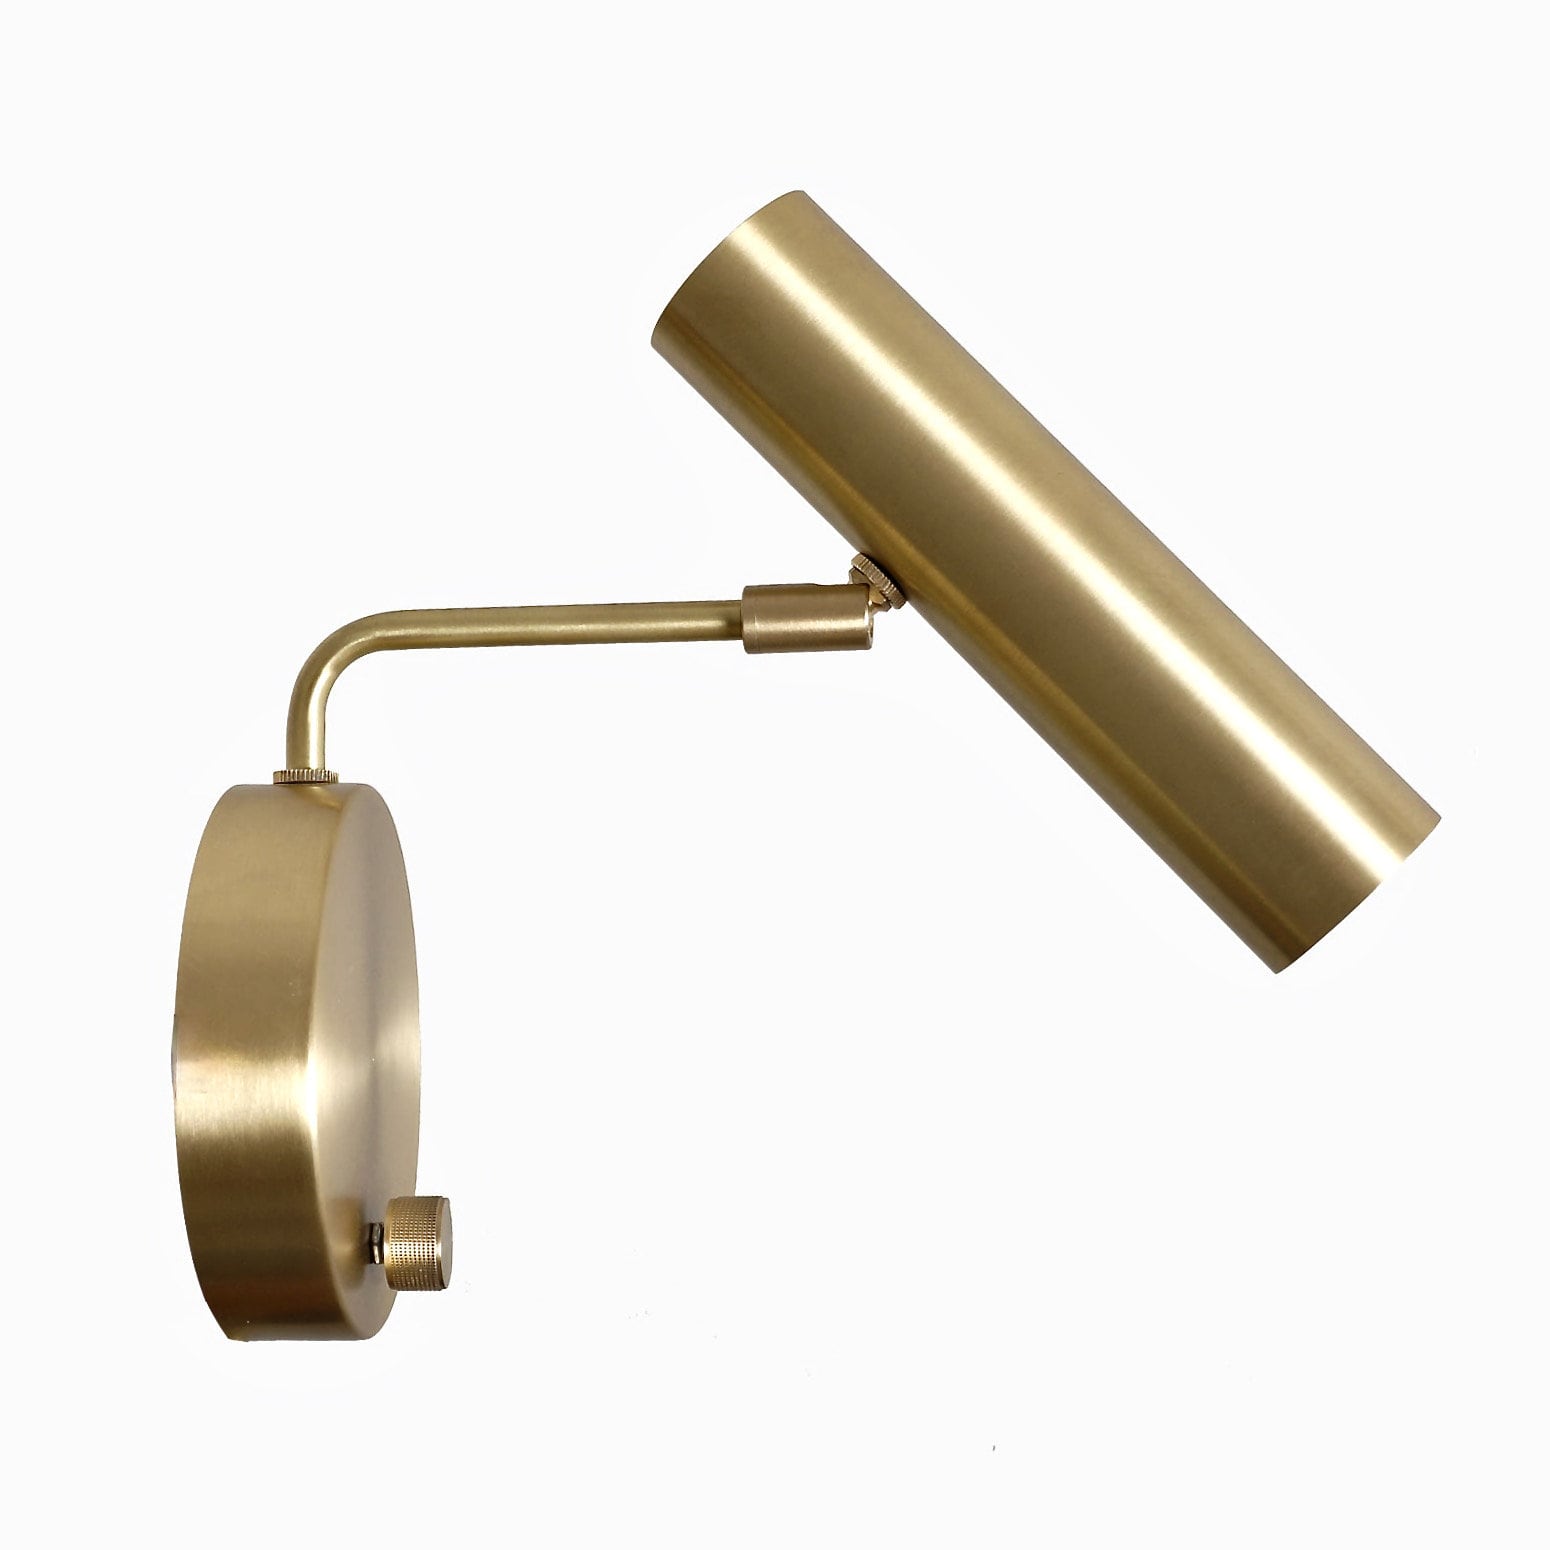 Nordic Modern Style Brass Exterior Wall Light Set For Reading